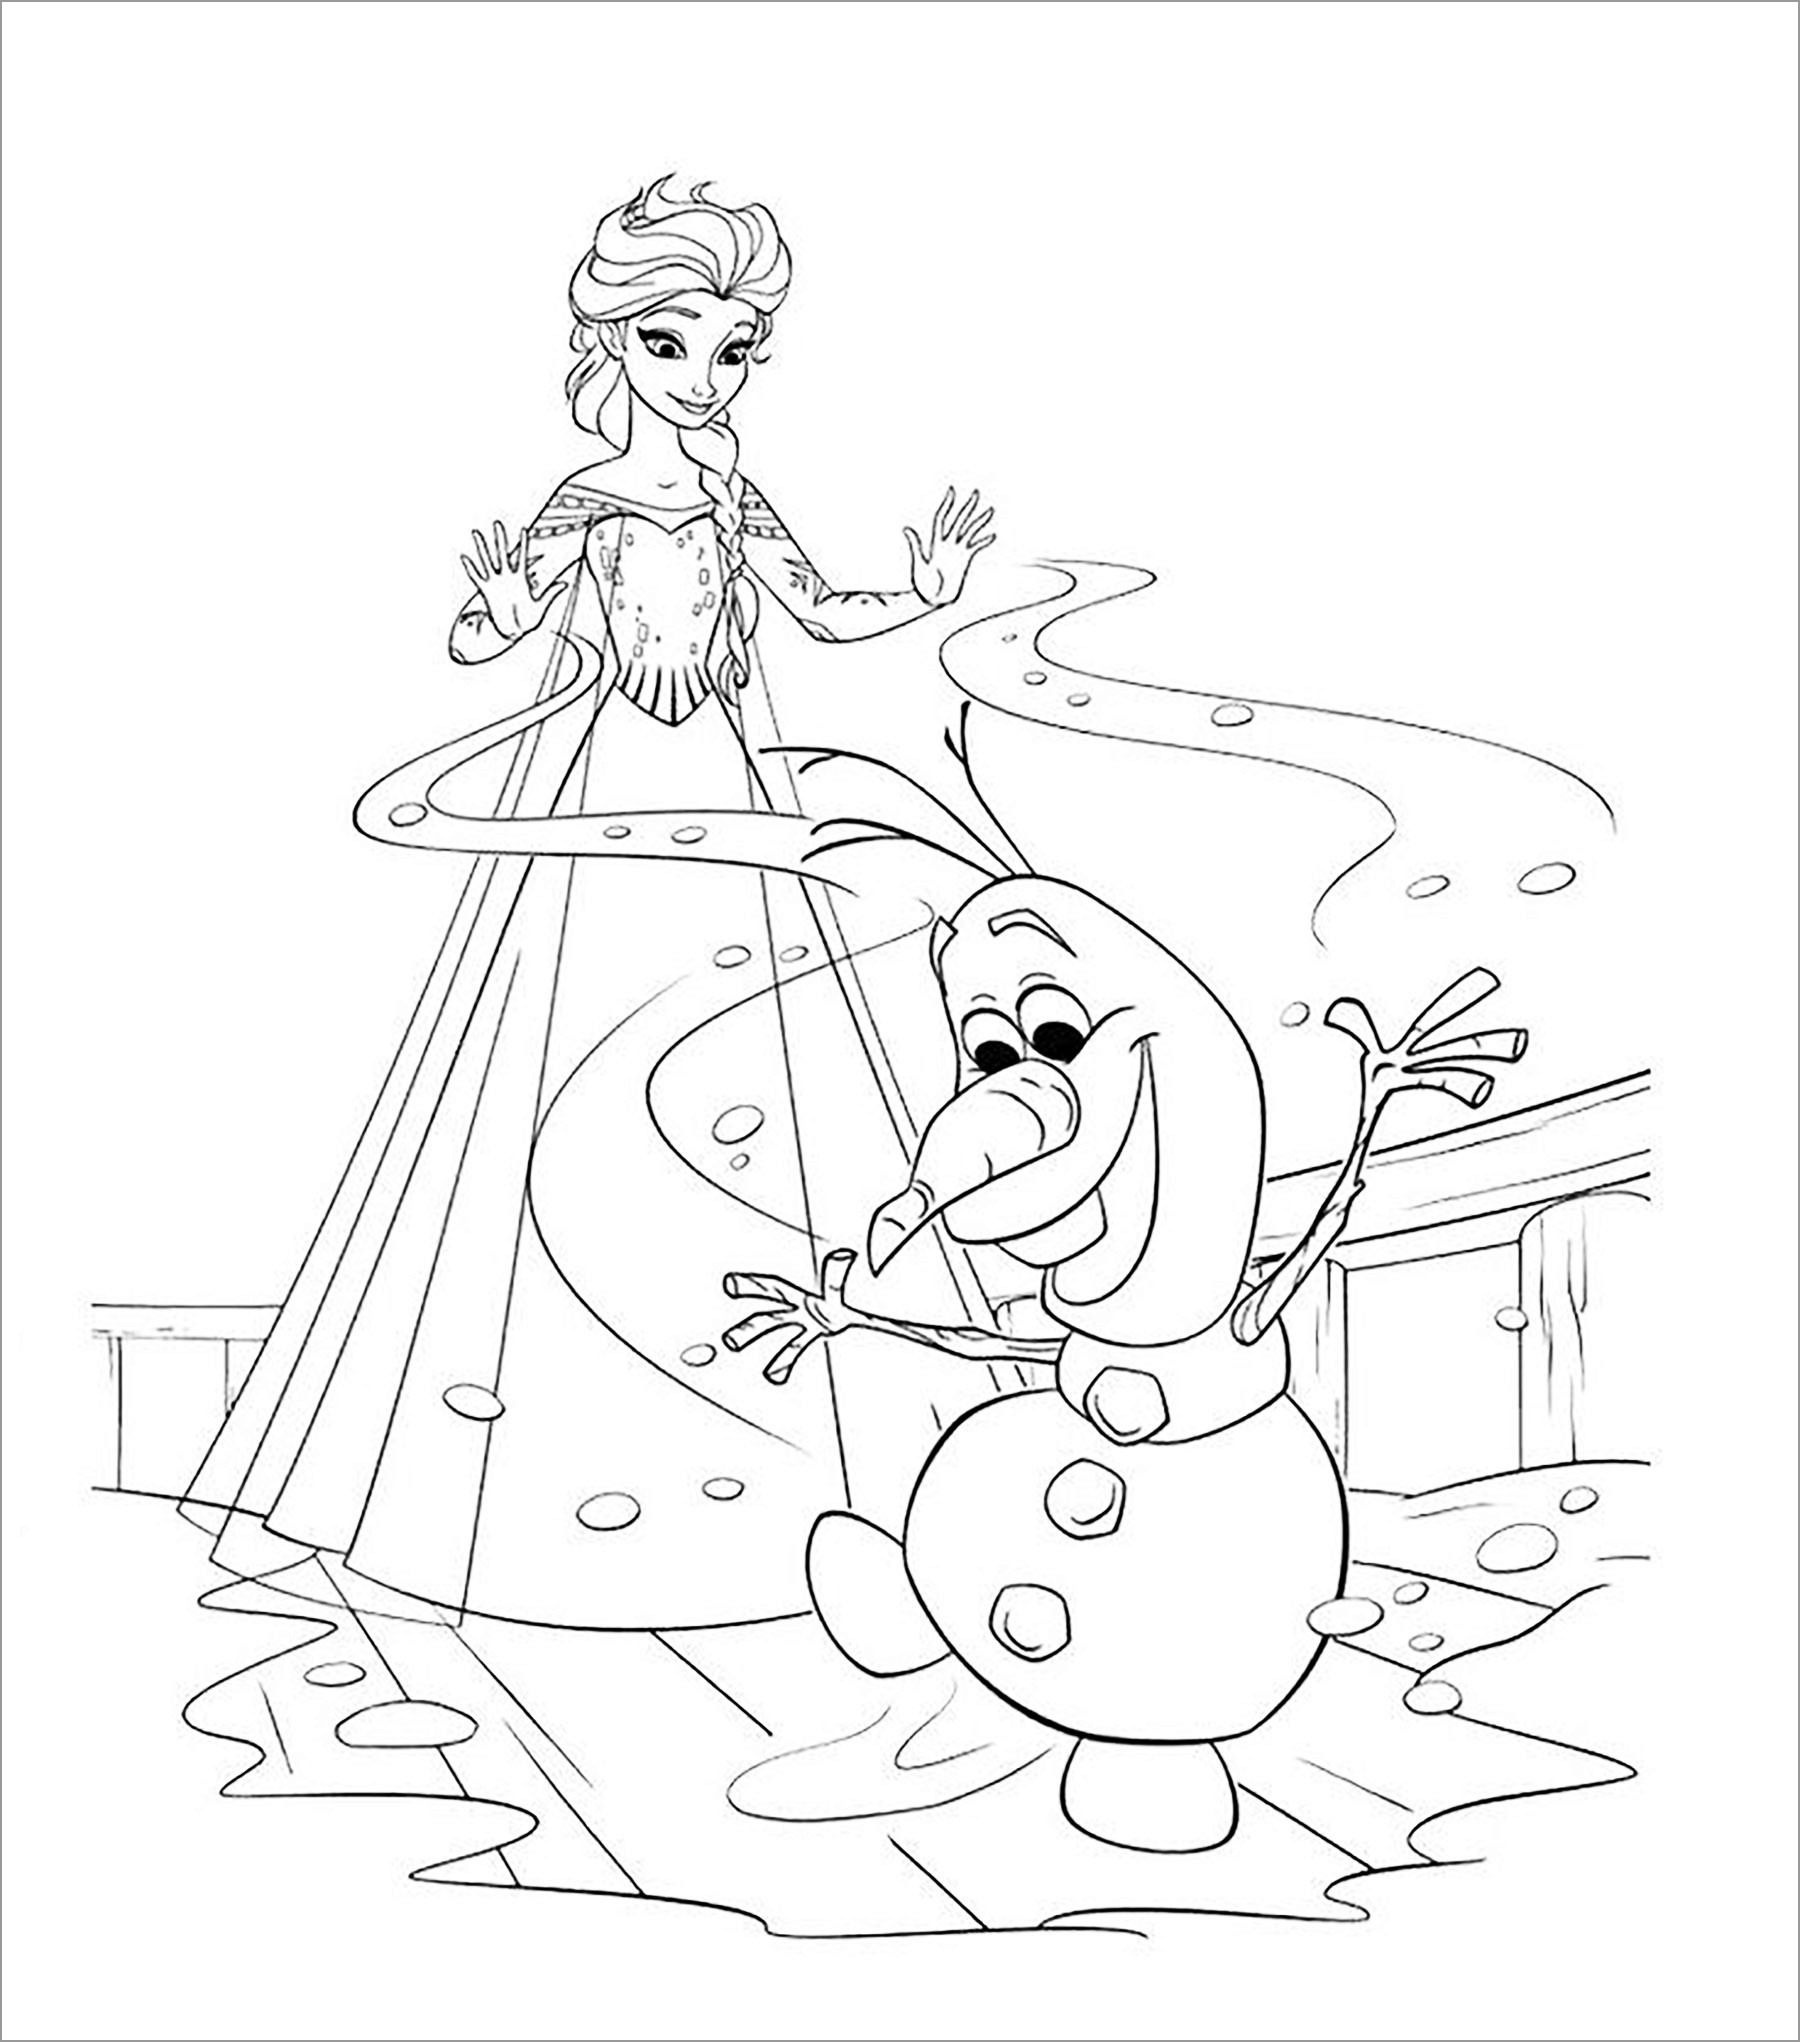 Elsa and Olaf Frozen Coloring Page